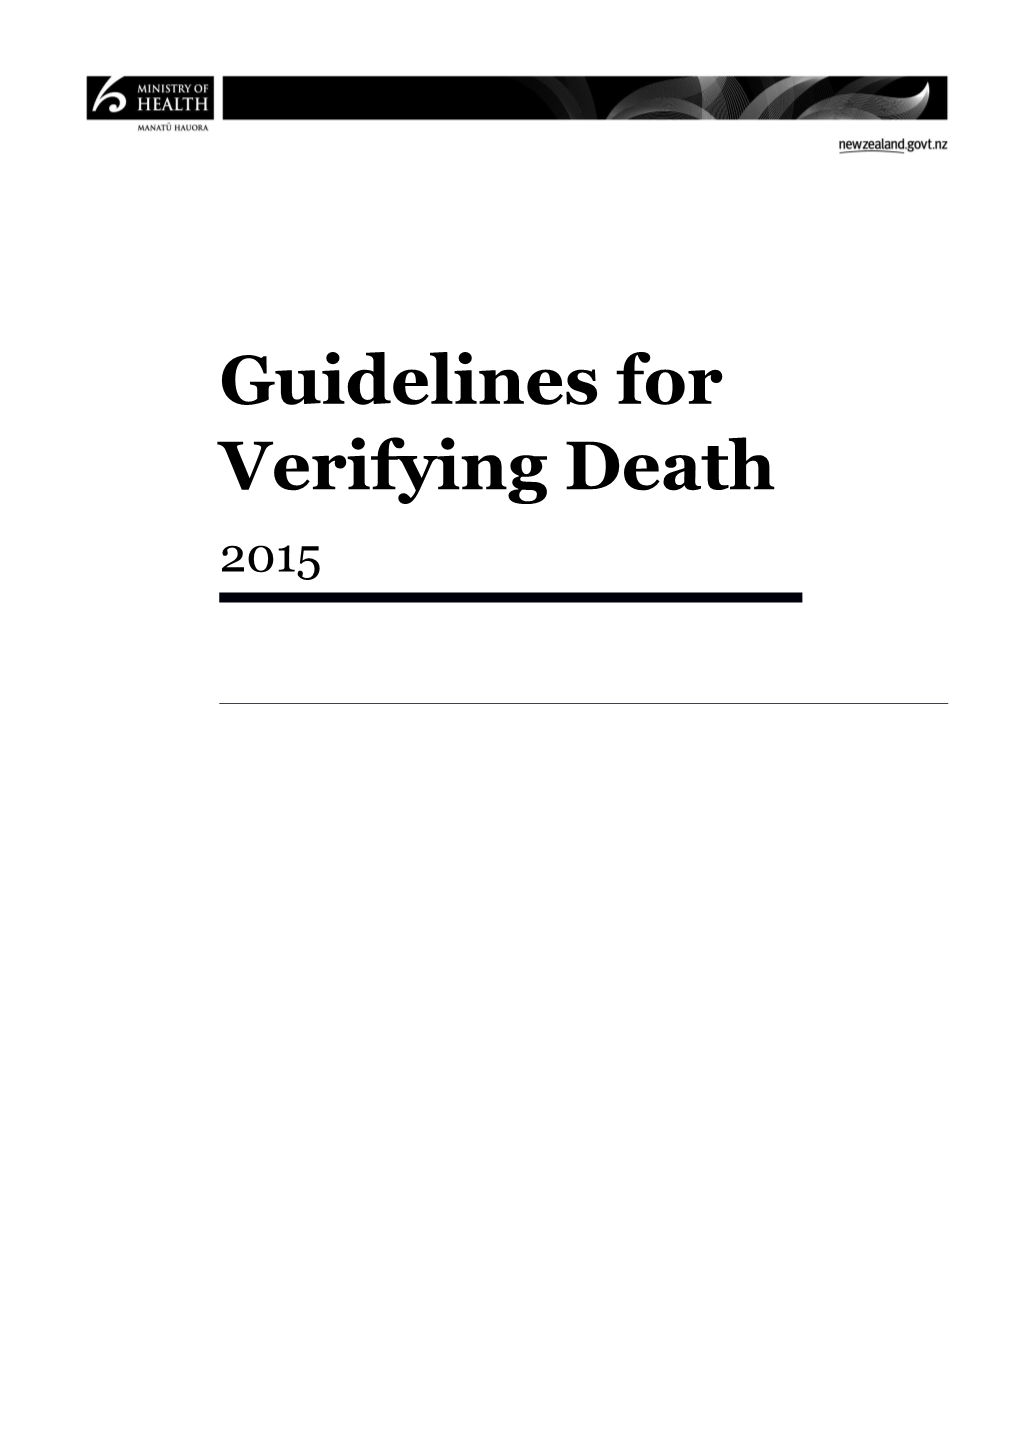 Guidelines for Verifying Death